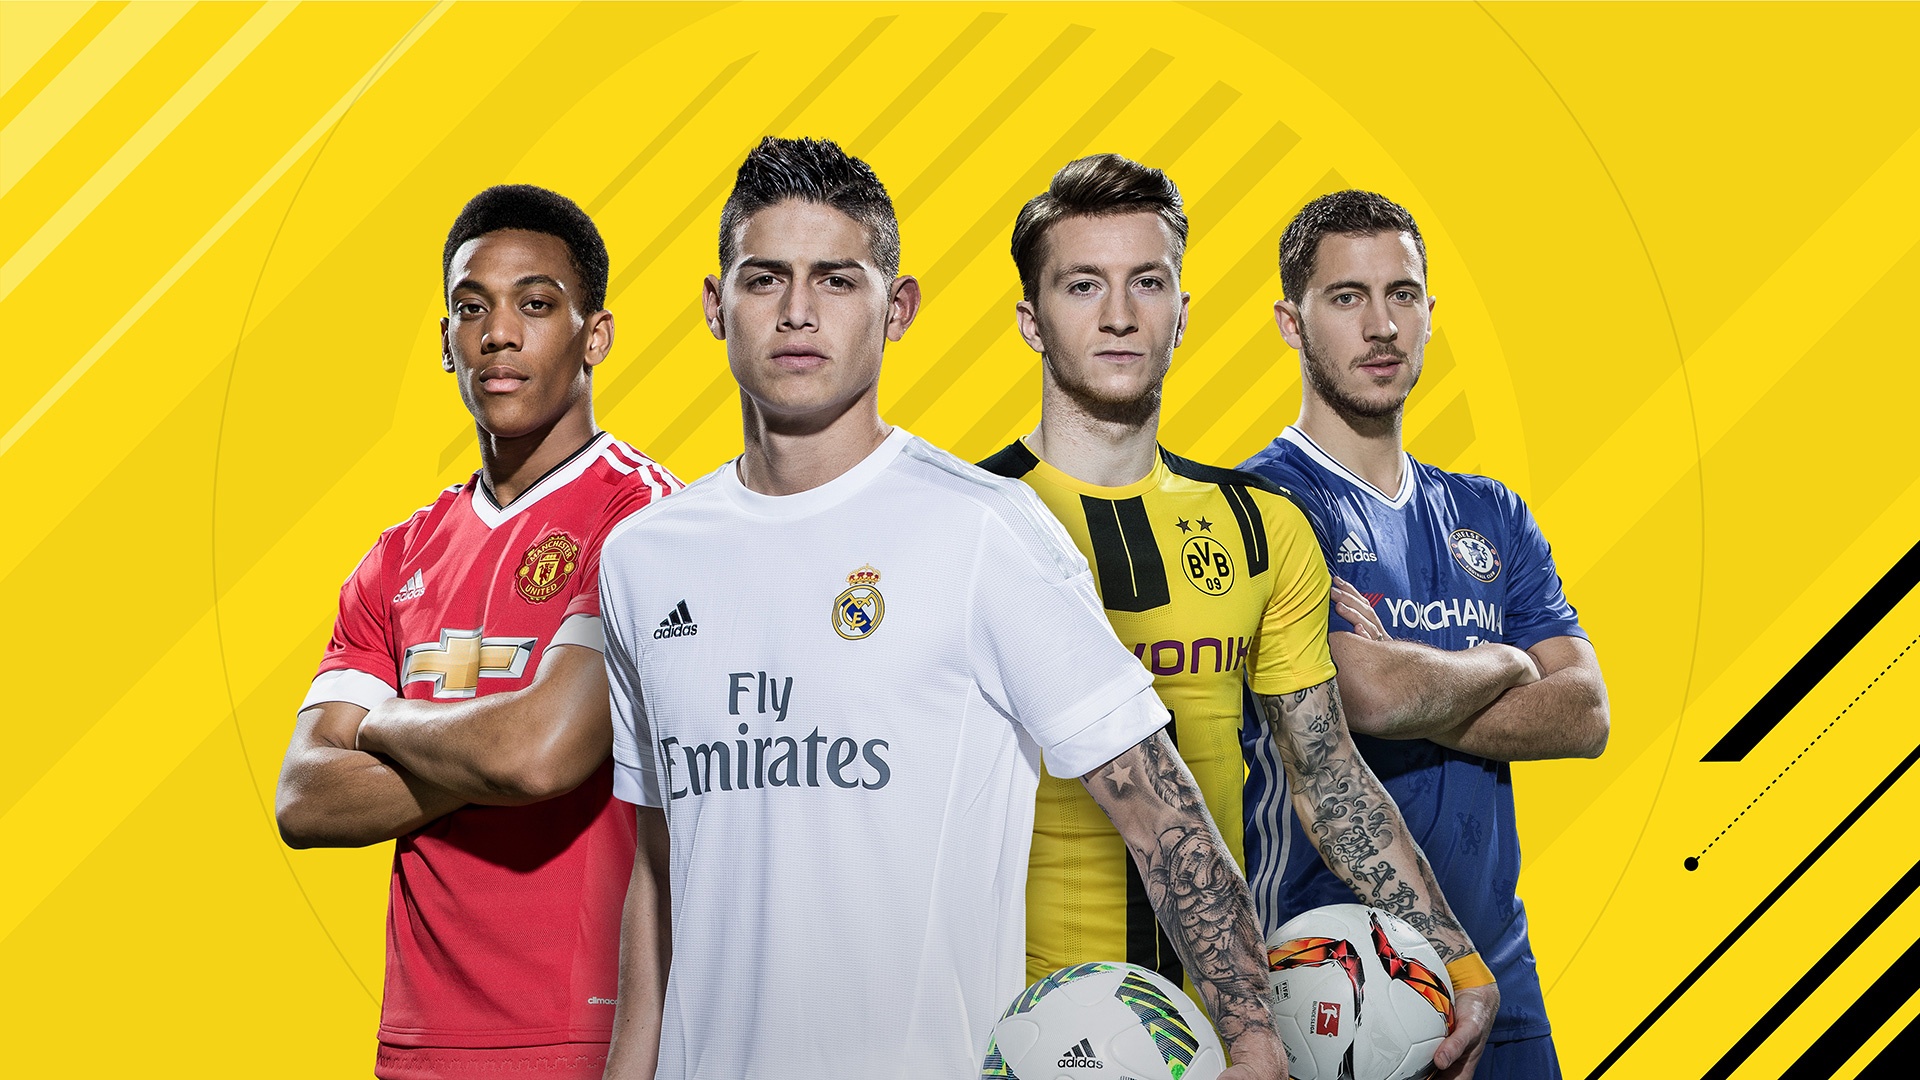 Video Game FIFA 17 HD Wallpaper | Background Image